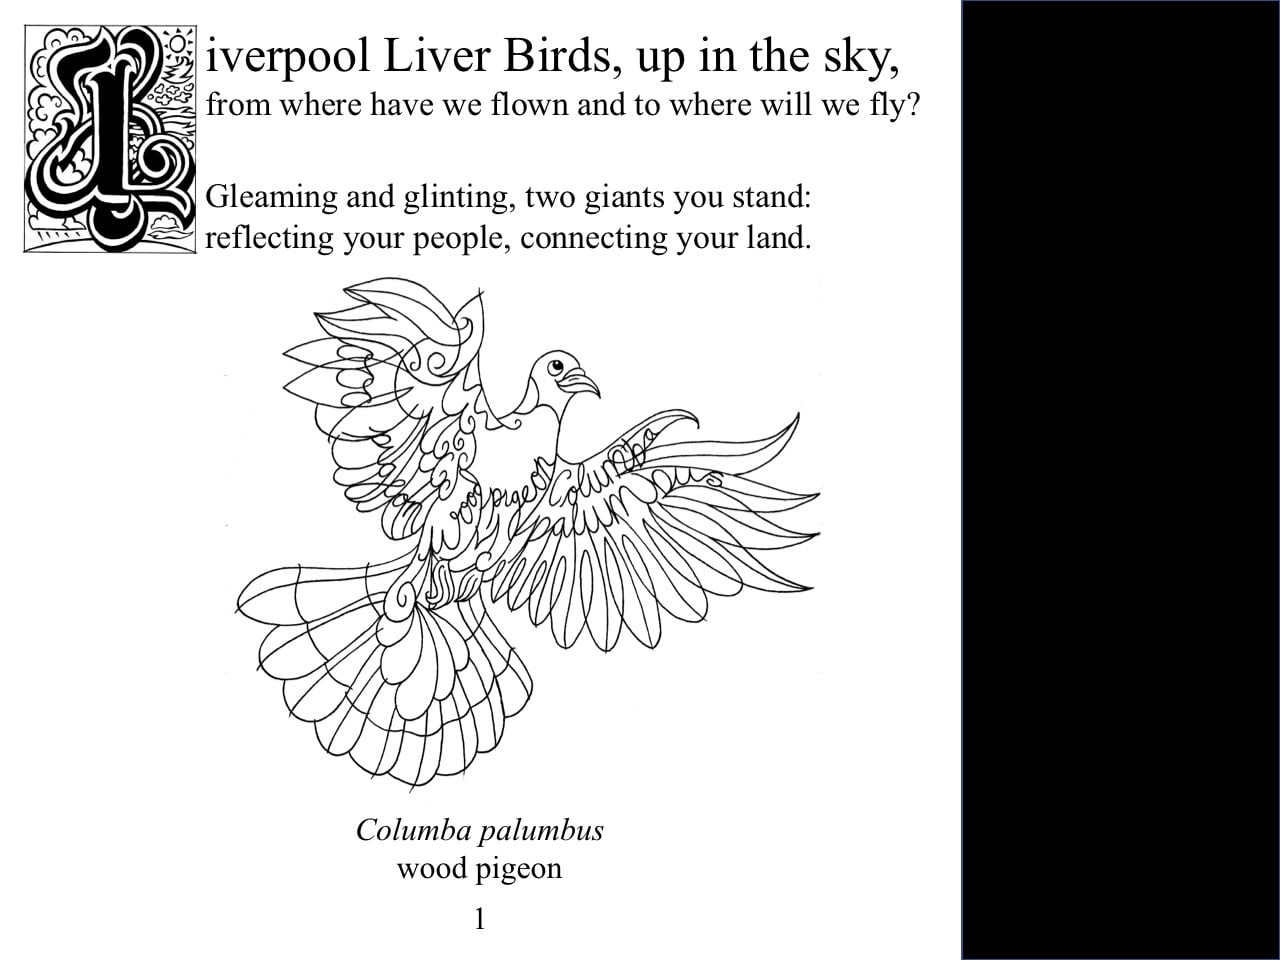 Liverpool Liver Birds: from where have we flown and to where will we fly?